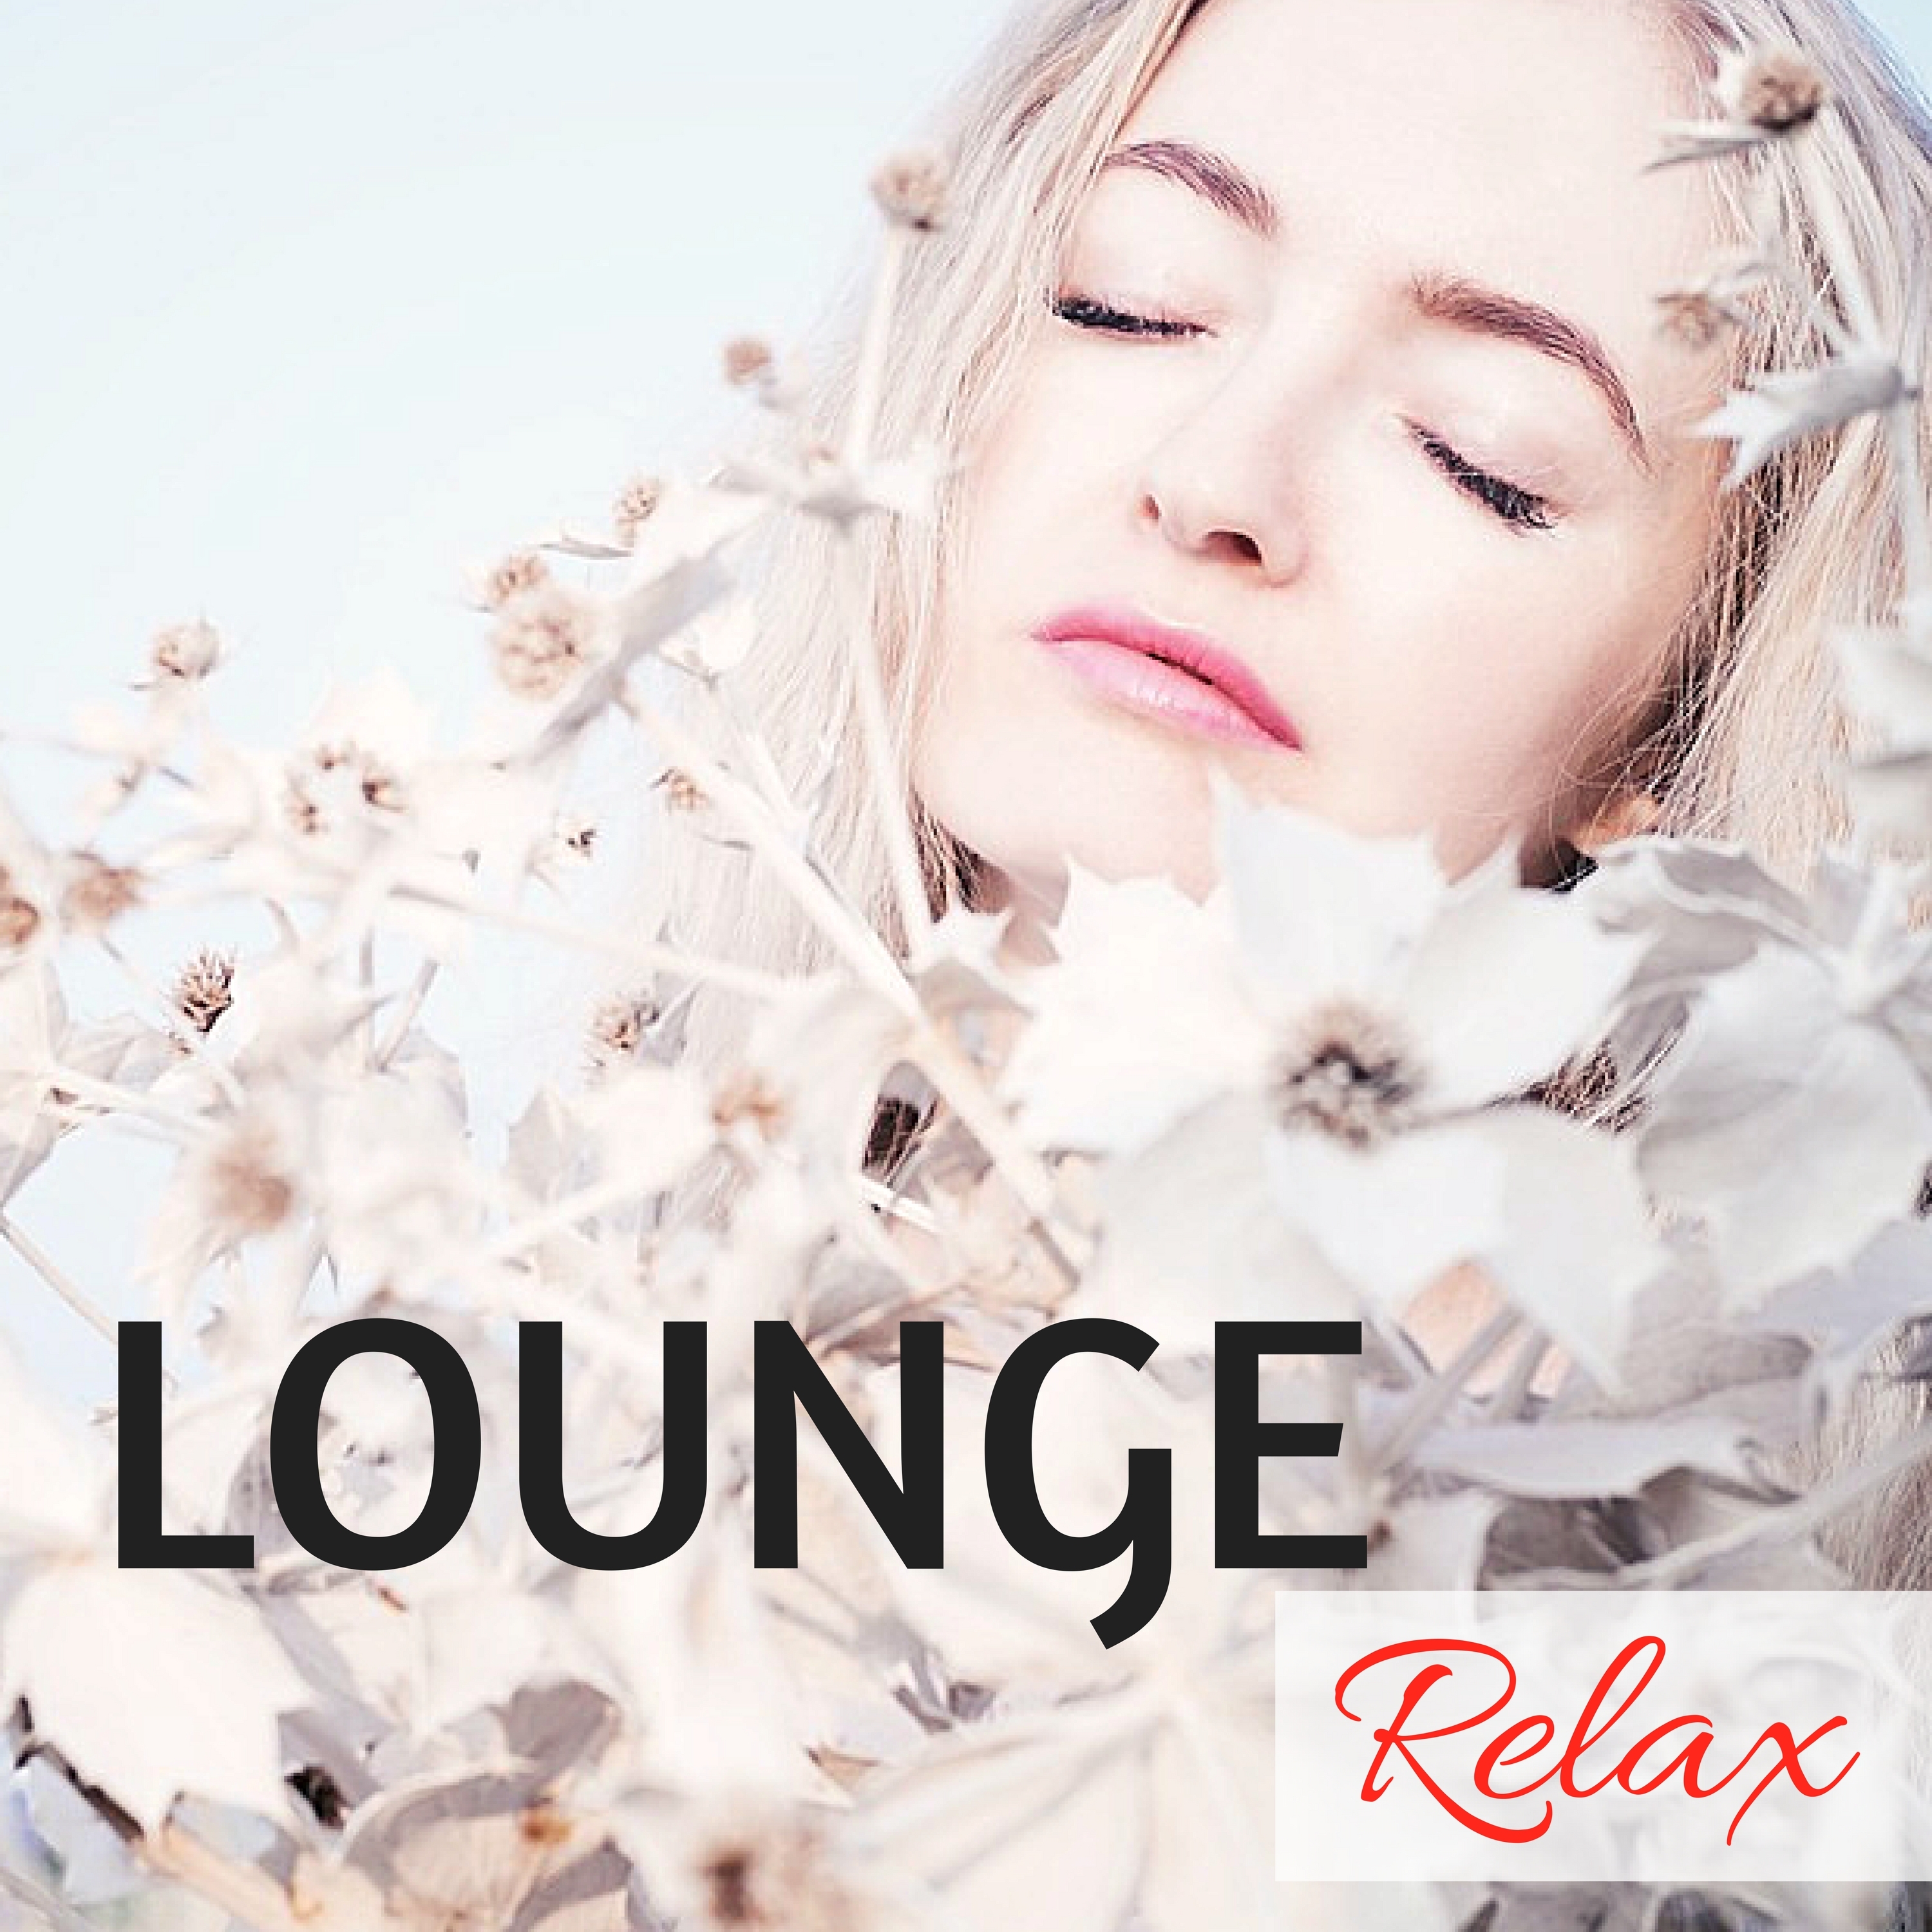 Lounge Relax  Best Playlist for Lounge Safari Buddha Chillout Do Mar Cafe